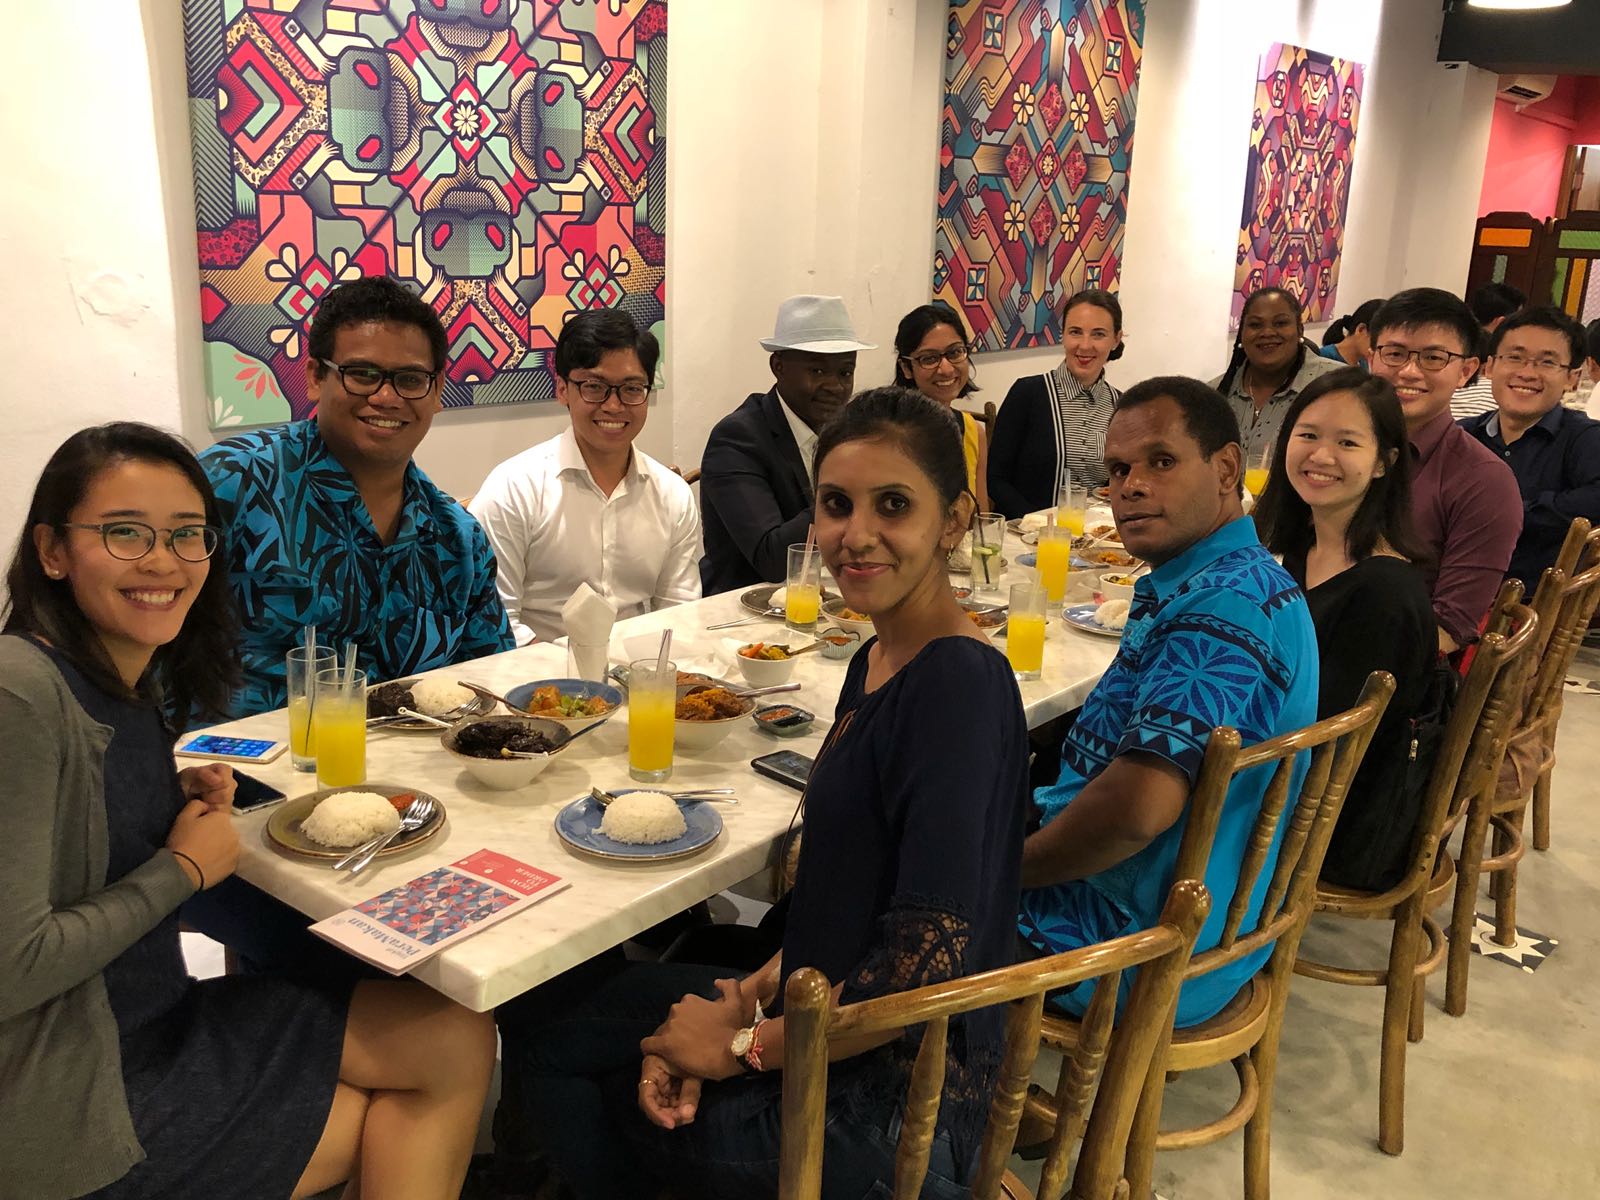 PFD 2018 participants having fun and enjoying Peranakan cuisine with Singapore MFA colleagues from the International Organisations Directorate and the Australia/New Zealand and The Pacific Directorate during the social night out on 10 May 2018